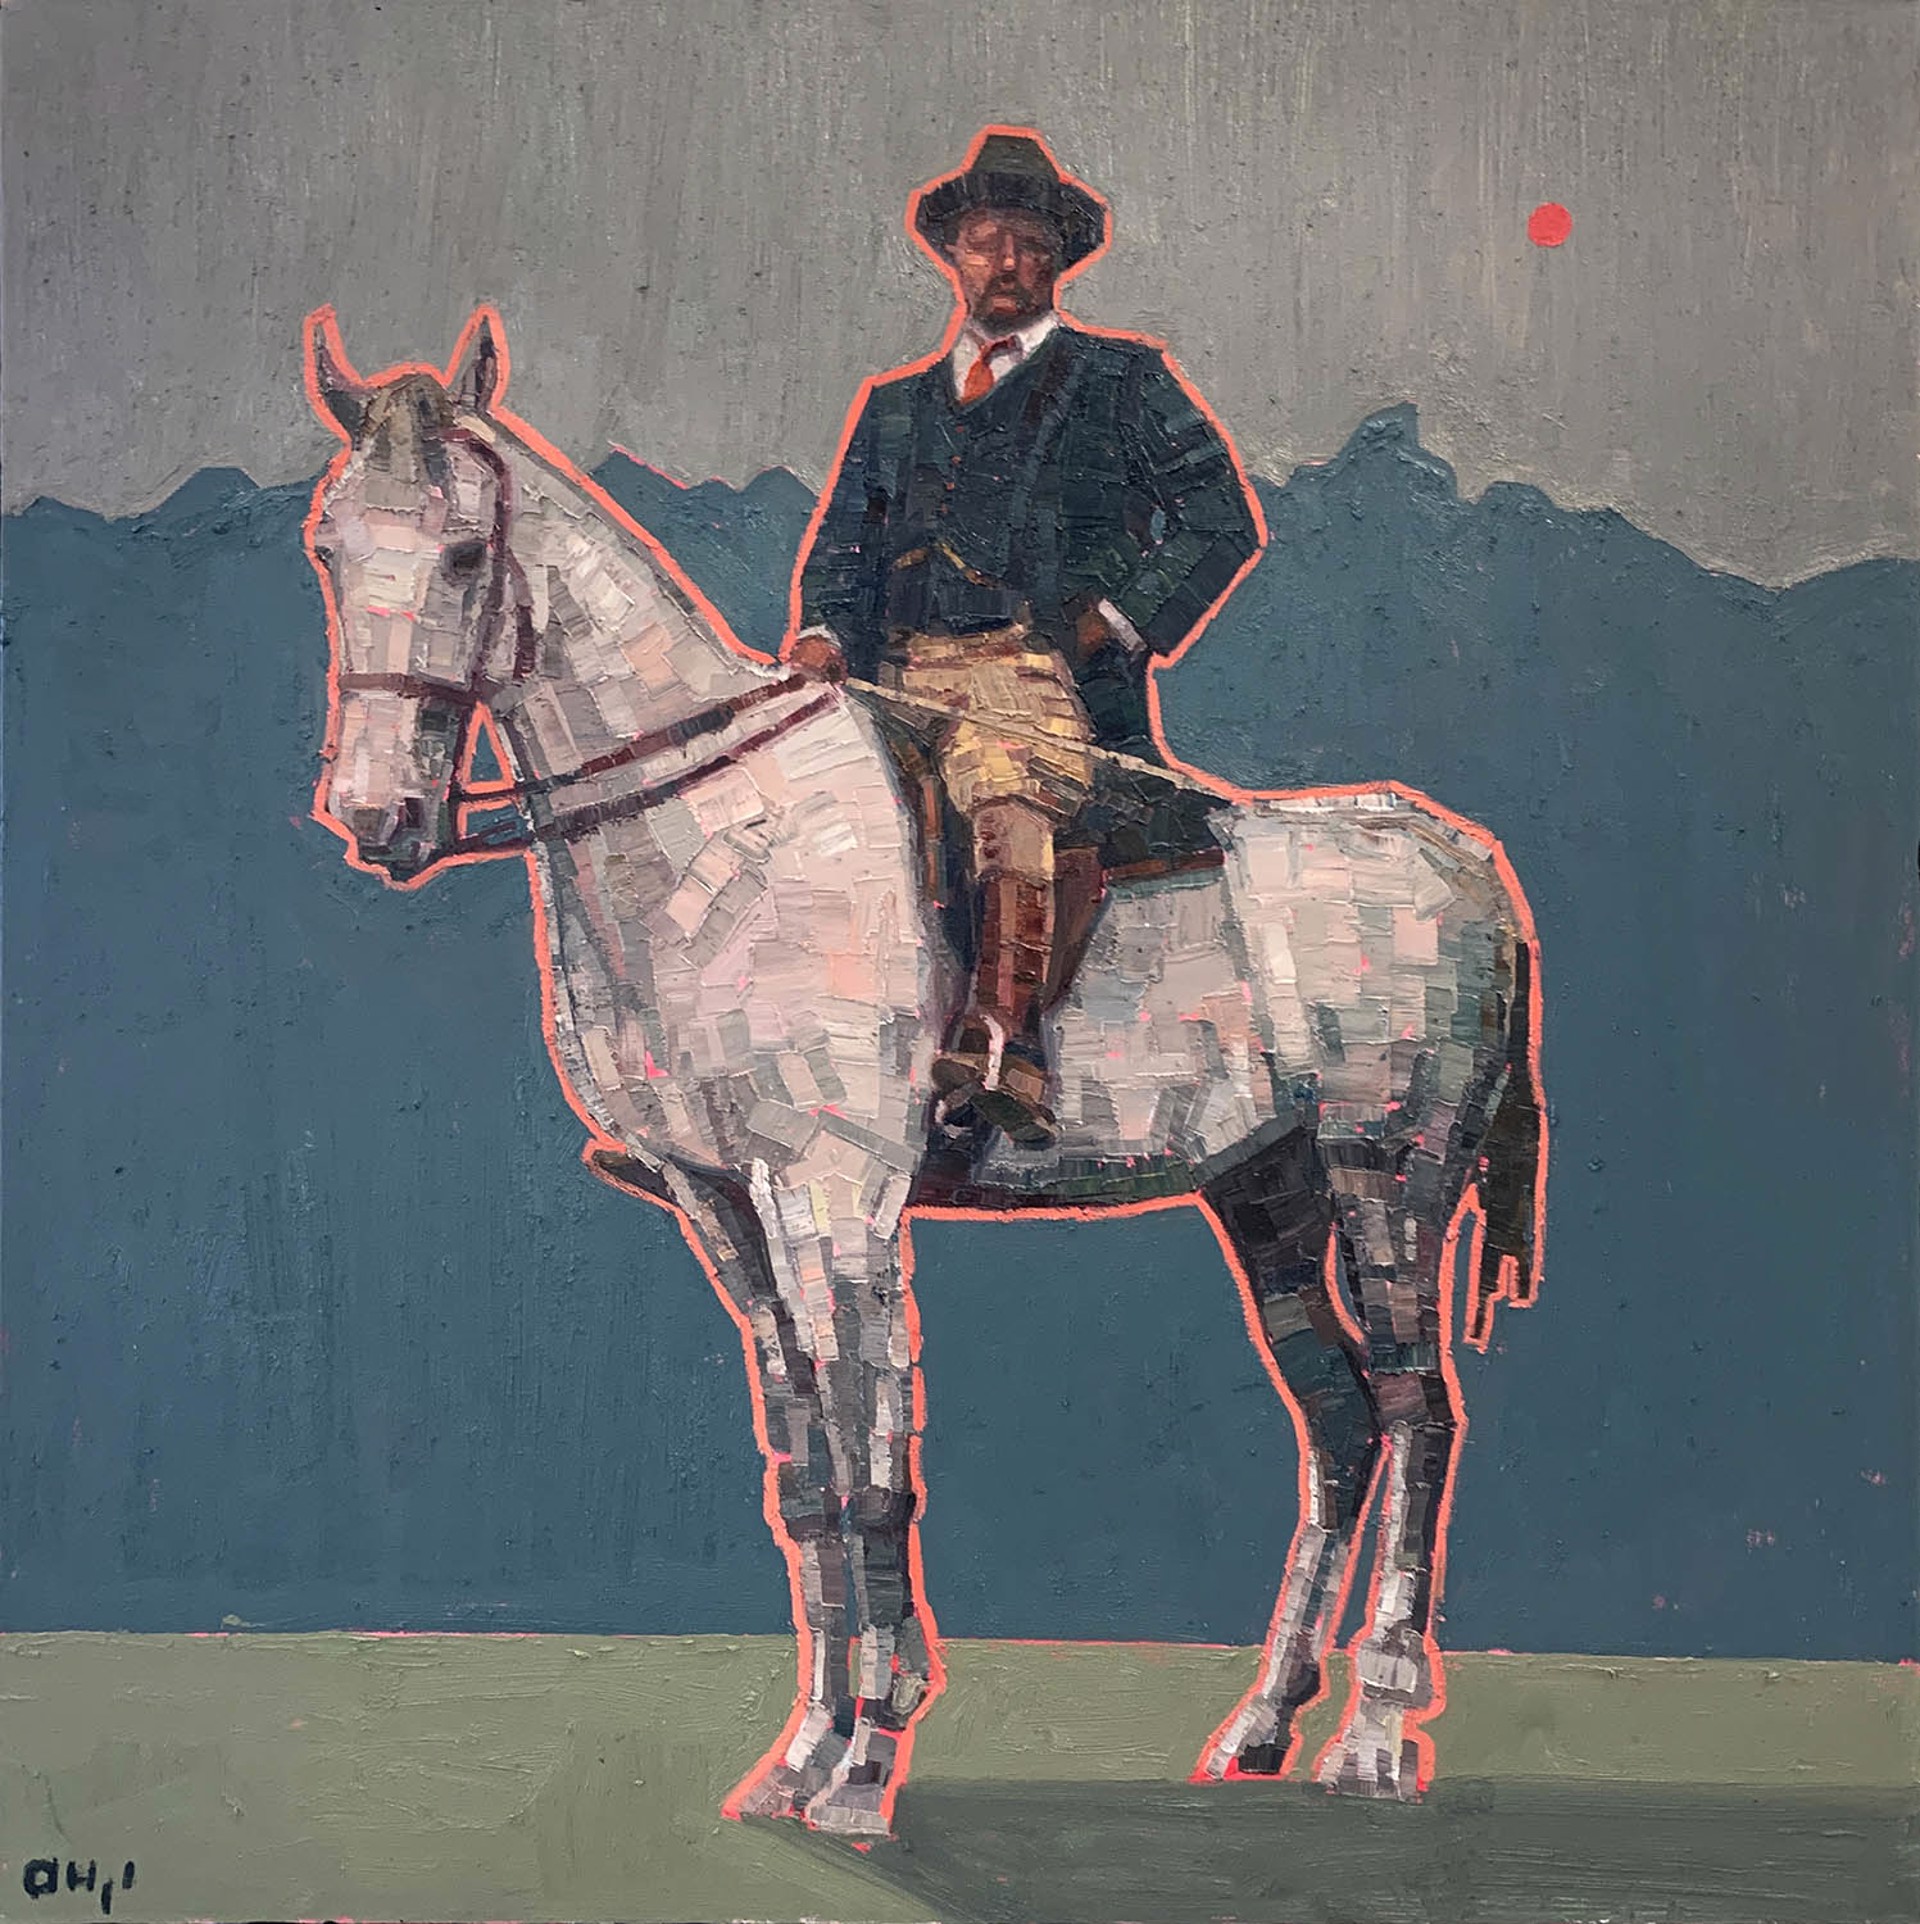 Original Oil Painting By Aaron Hazel Featuring Teddy Roosevelt On Horseback With Mountain Range Silhouette In The Background